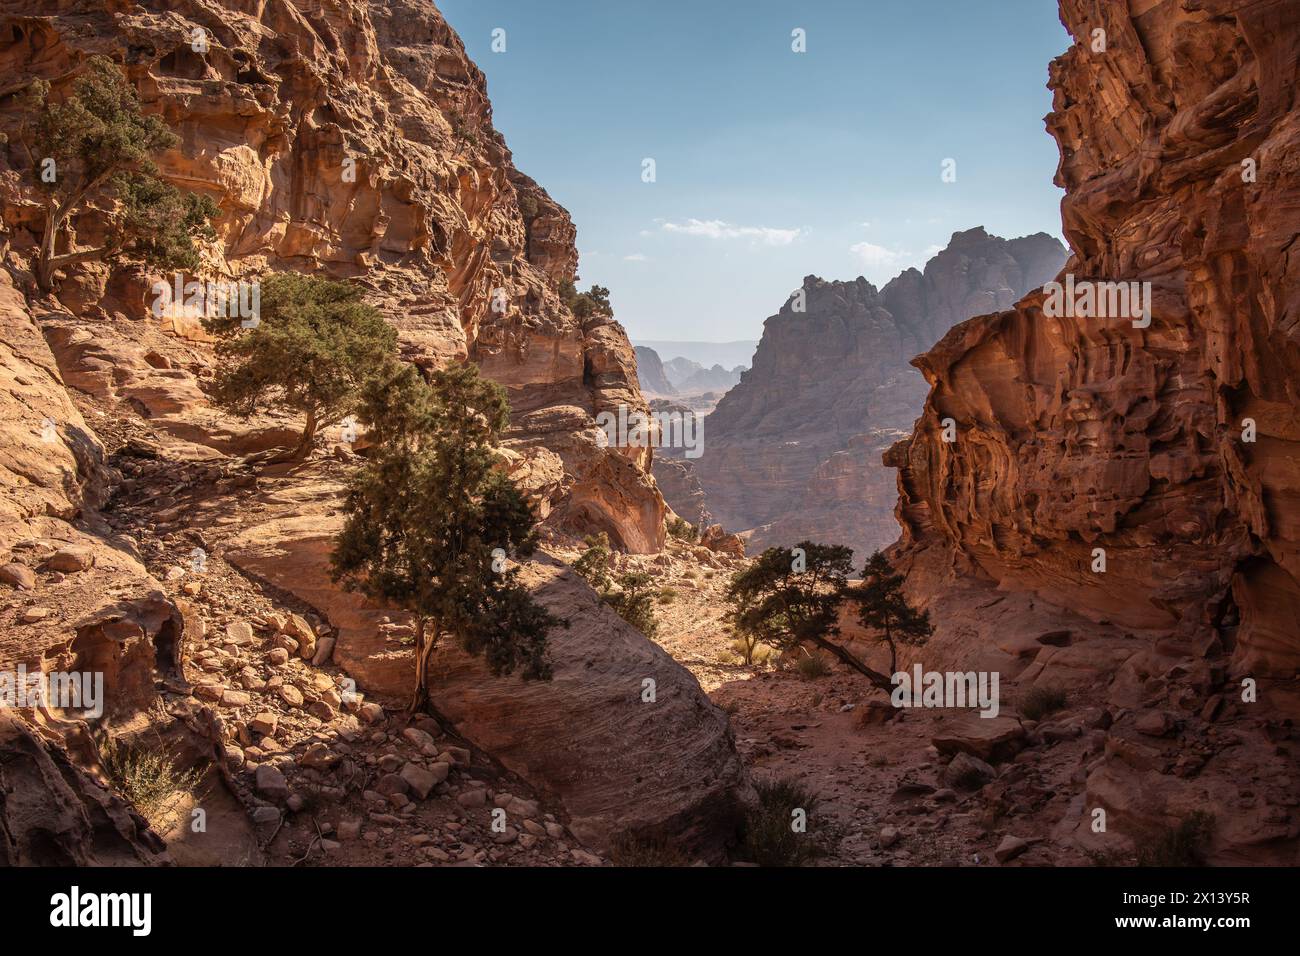 View of Rocky Sandstone Canyon in Jordanian Petra. Middle East Scenery of Outdoor Landscape. Spectacular Stony Cliffs in Jordan. Stock Photo